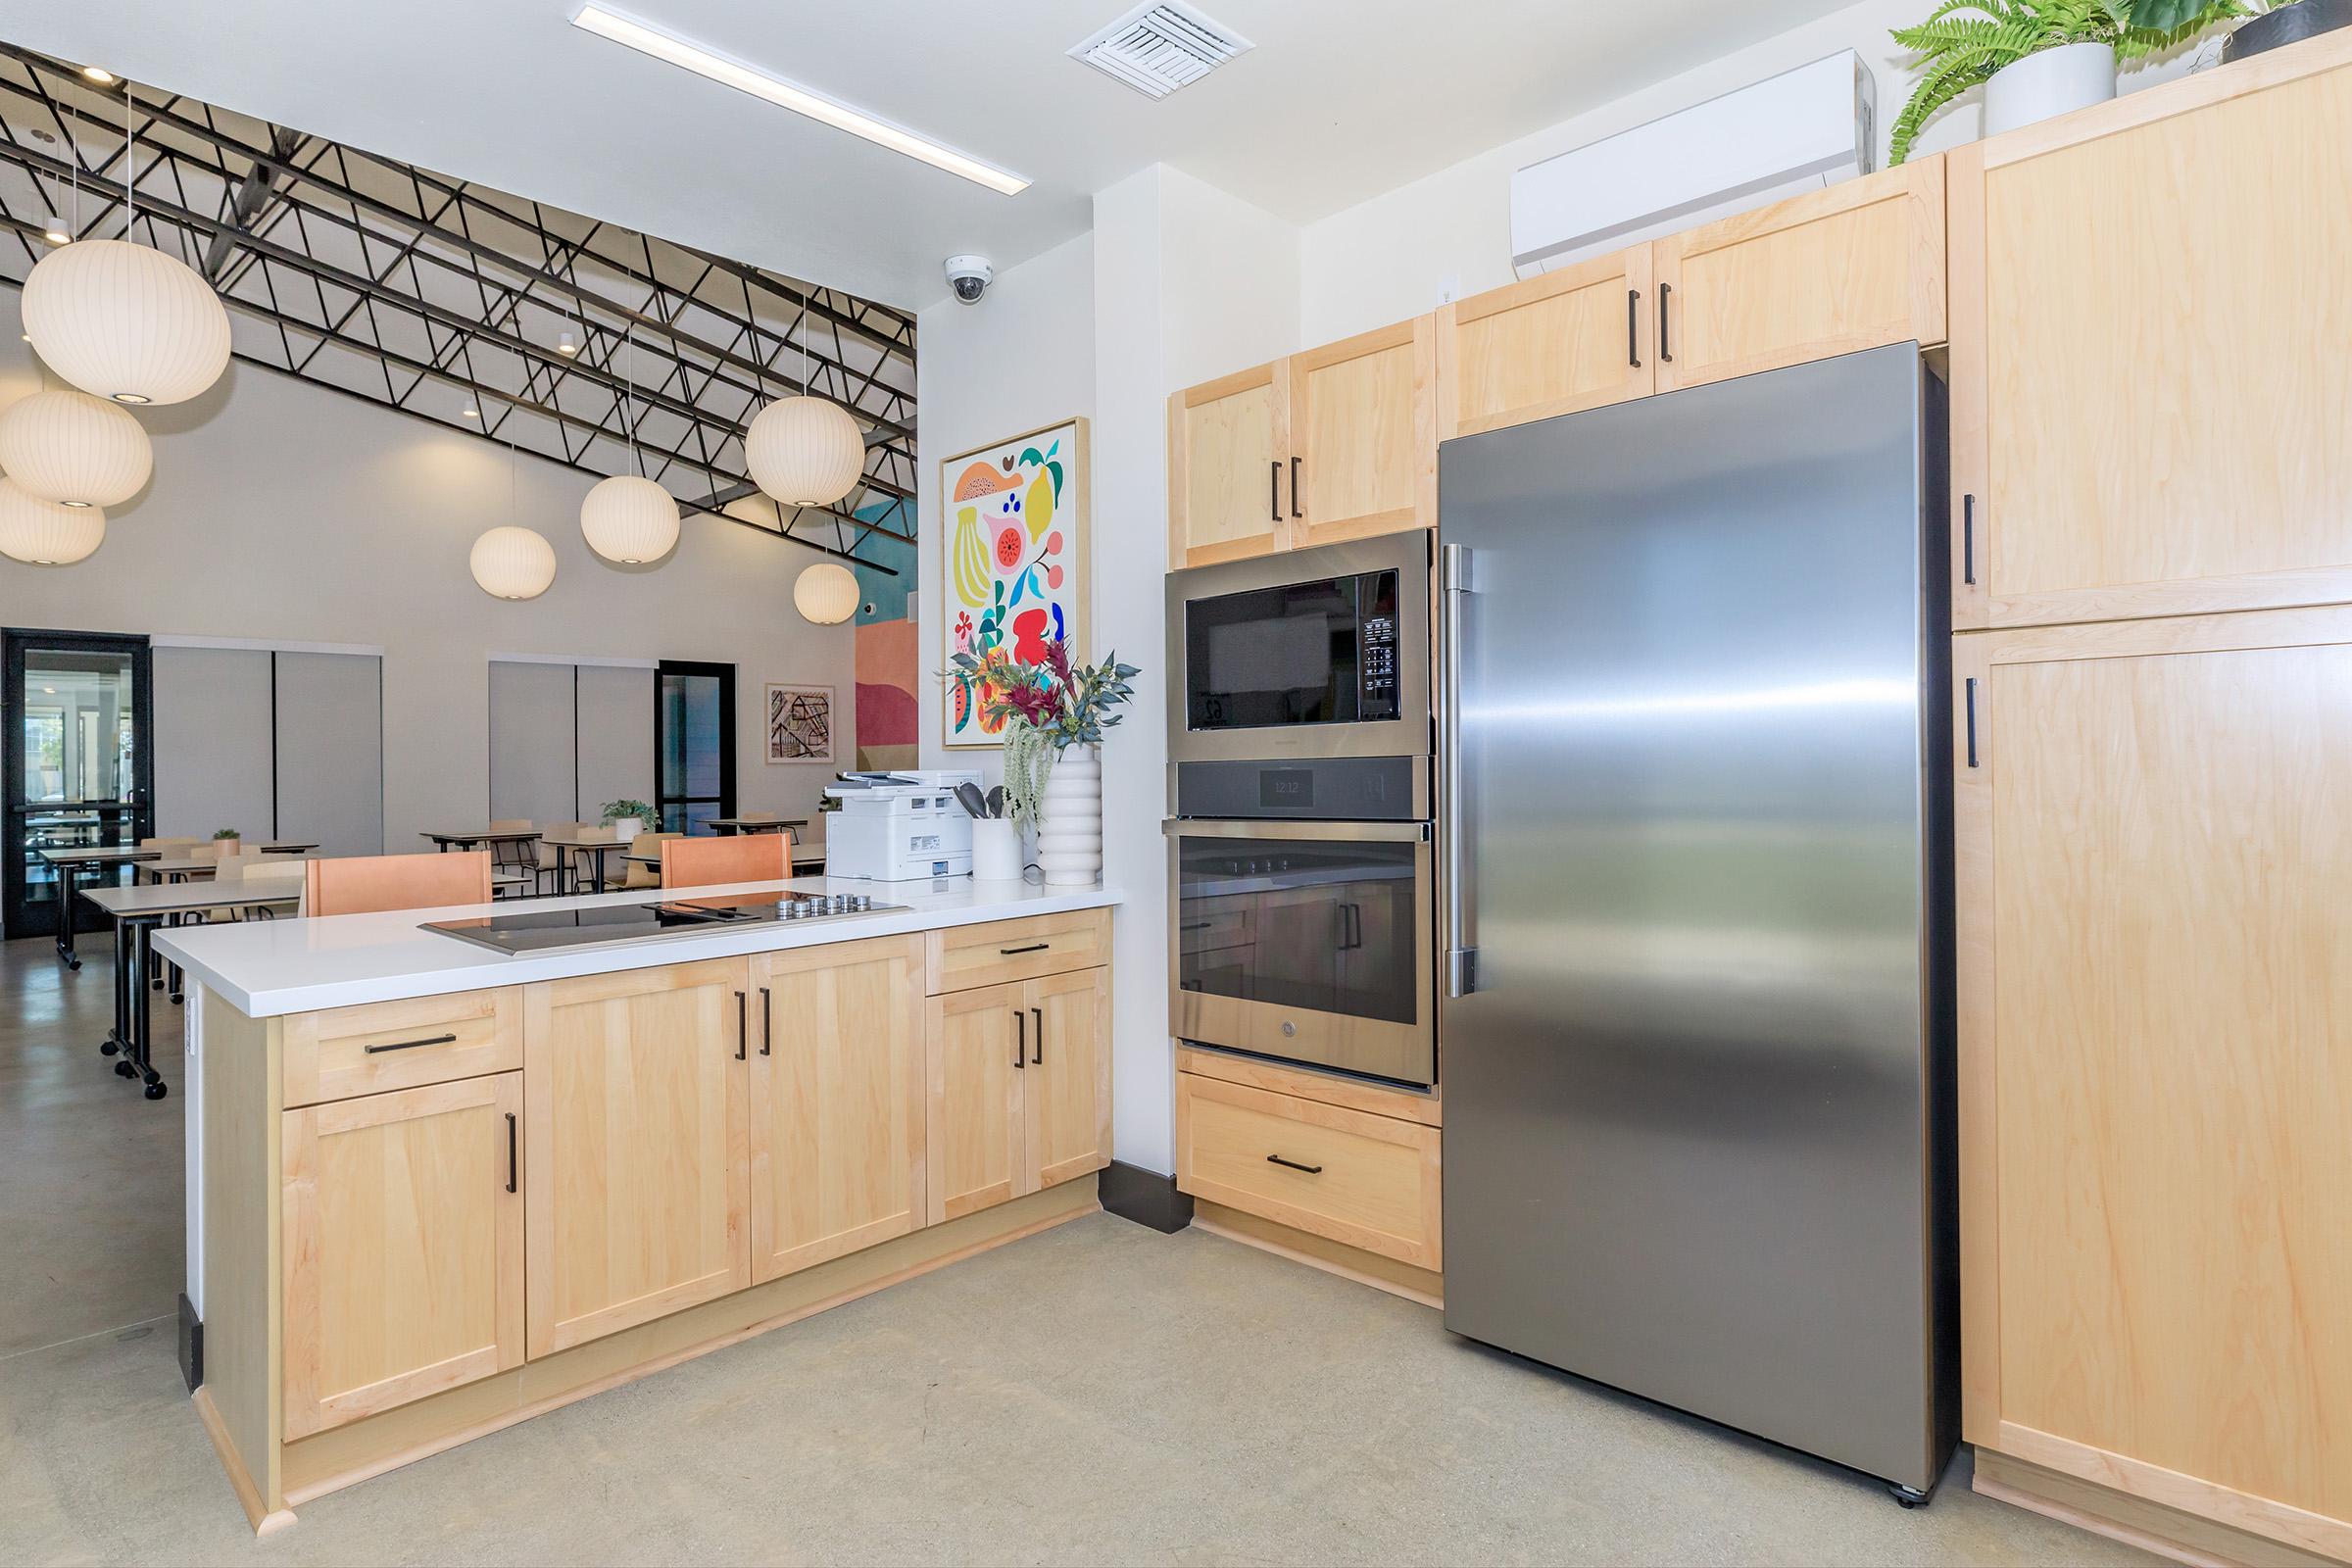 a stainless steel refrigerator in a kitchen